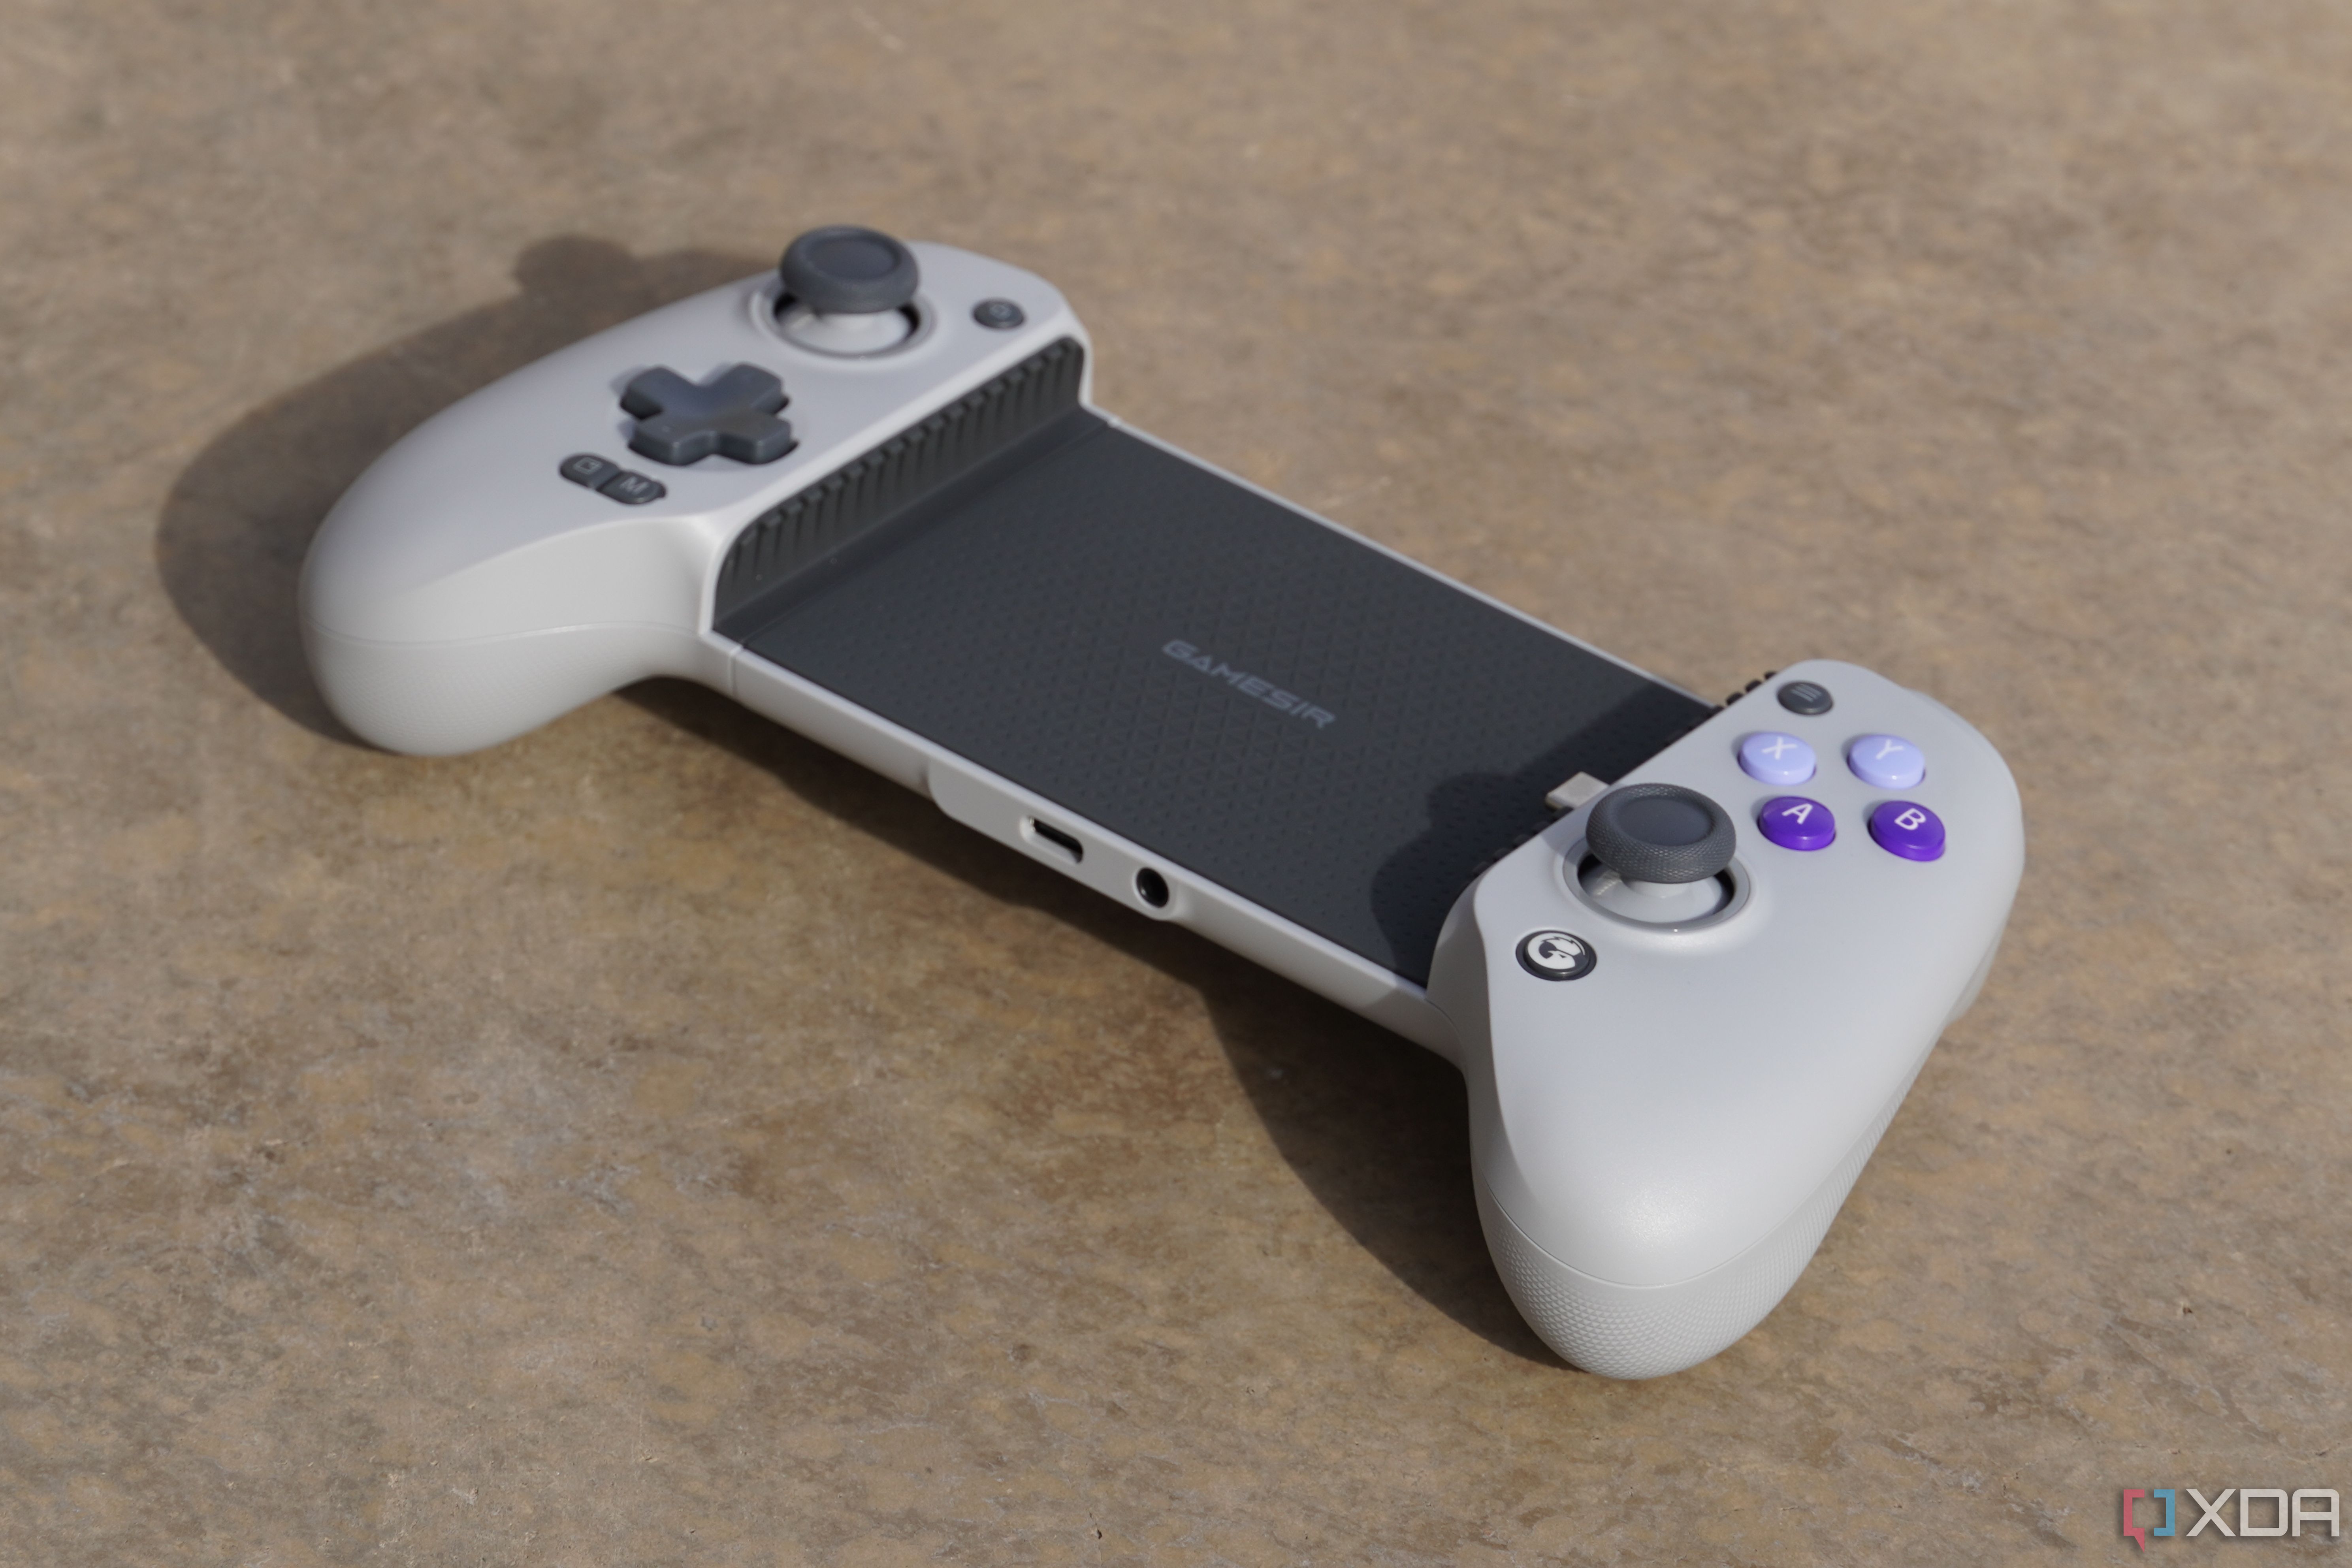 GameSir G8 Galileo review: Your phone is finally a proper portable gaming  station